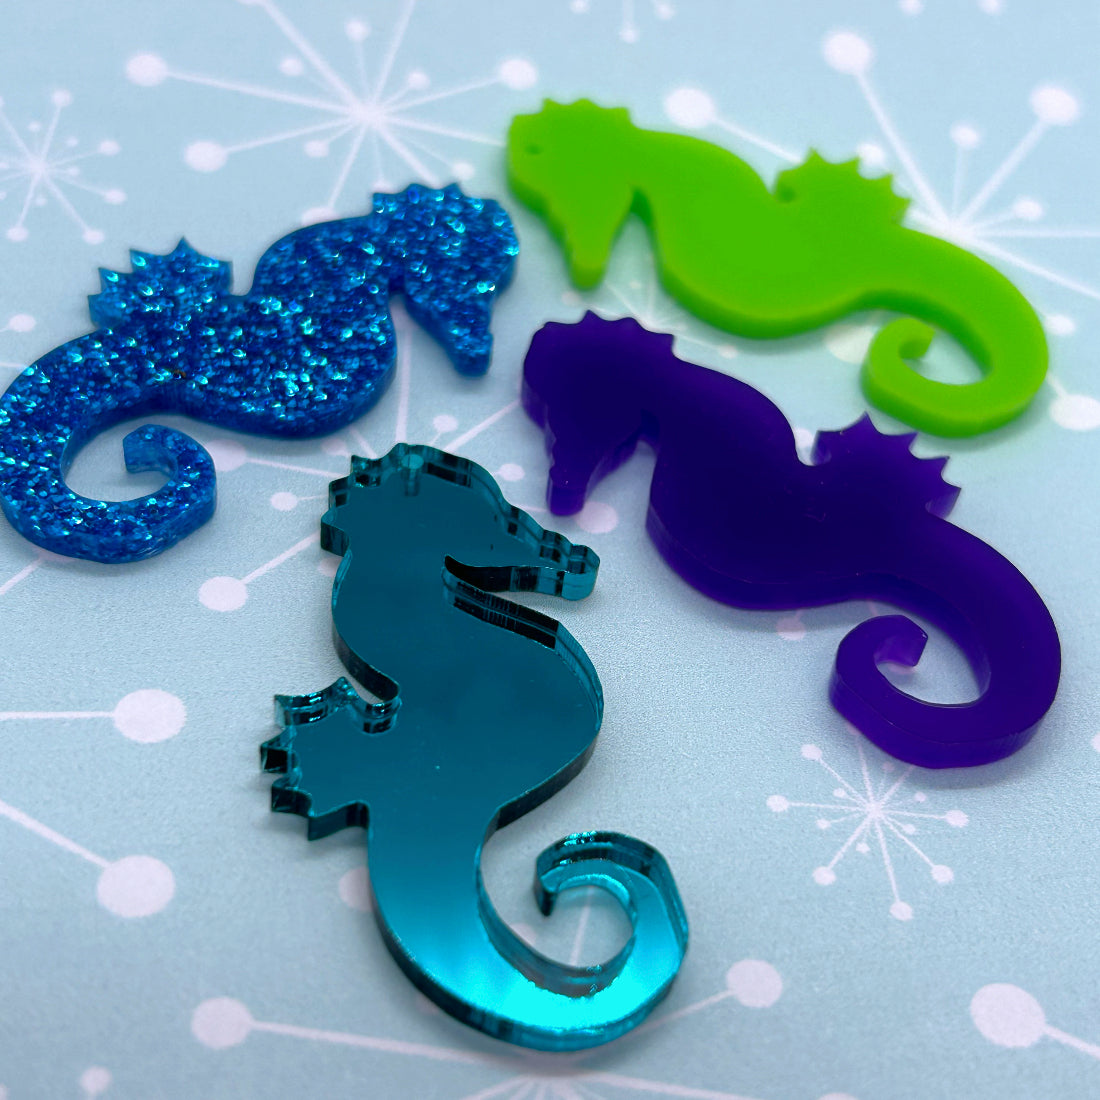 Acrylic Seahorse Brooch and Necklace - The Argentum Design Co